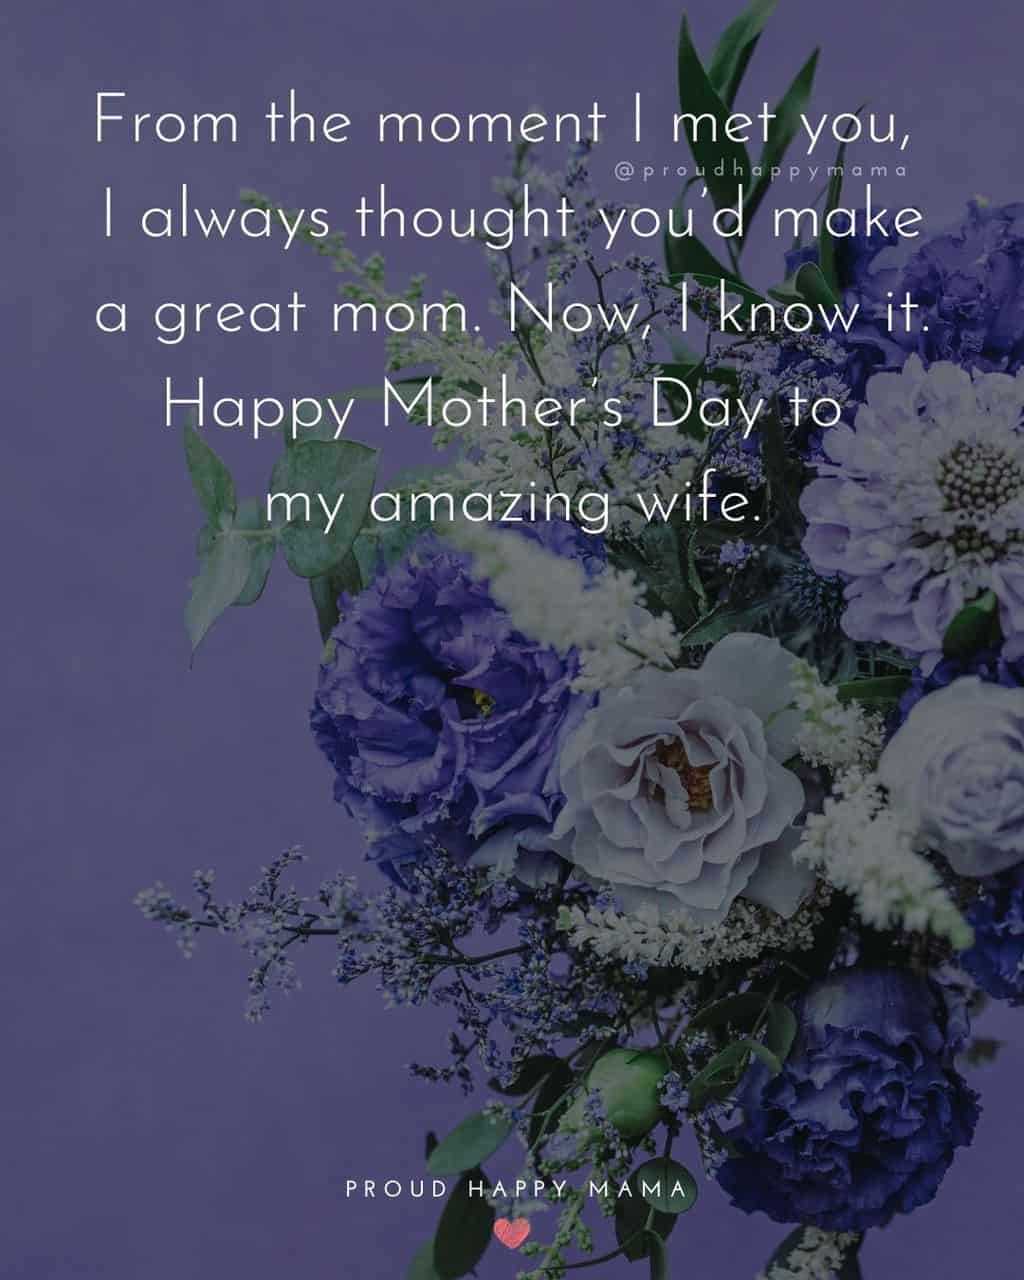 Happy Mothers Day Quotes For Wife - From the moment I met you, I always thought you’d make a great mom. Now, I know it.